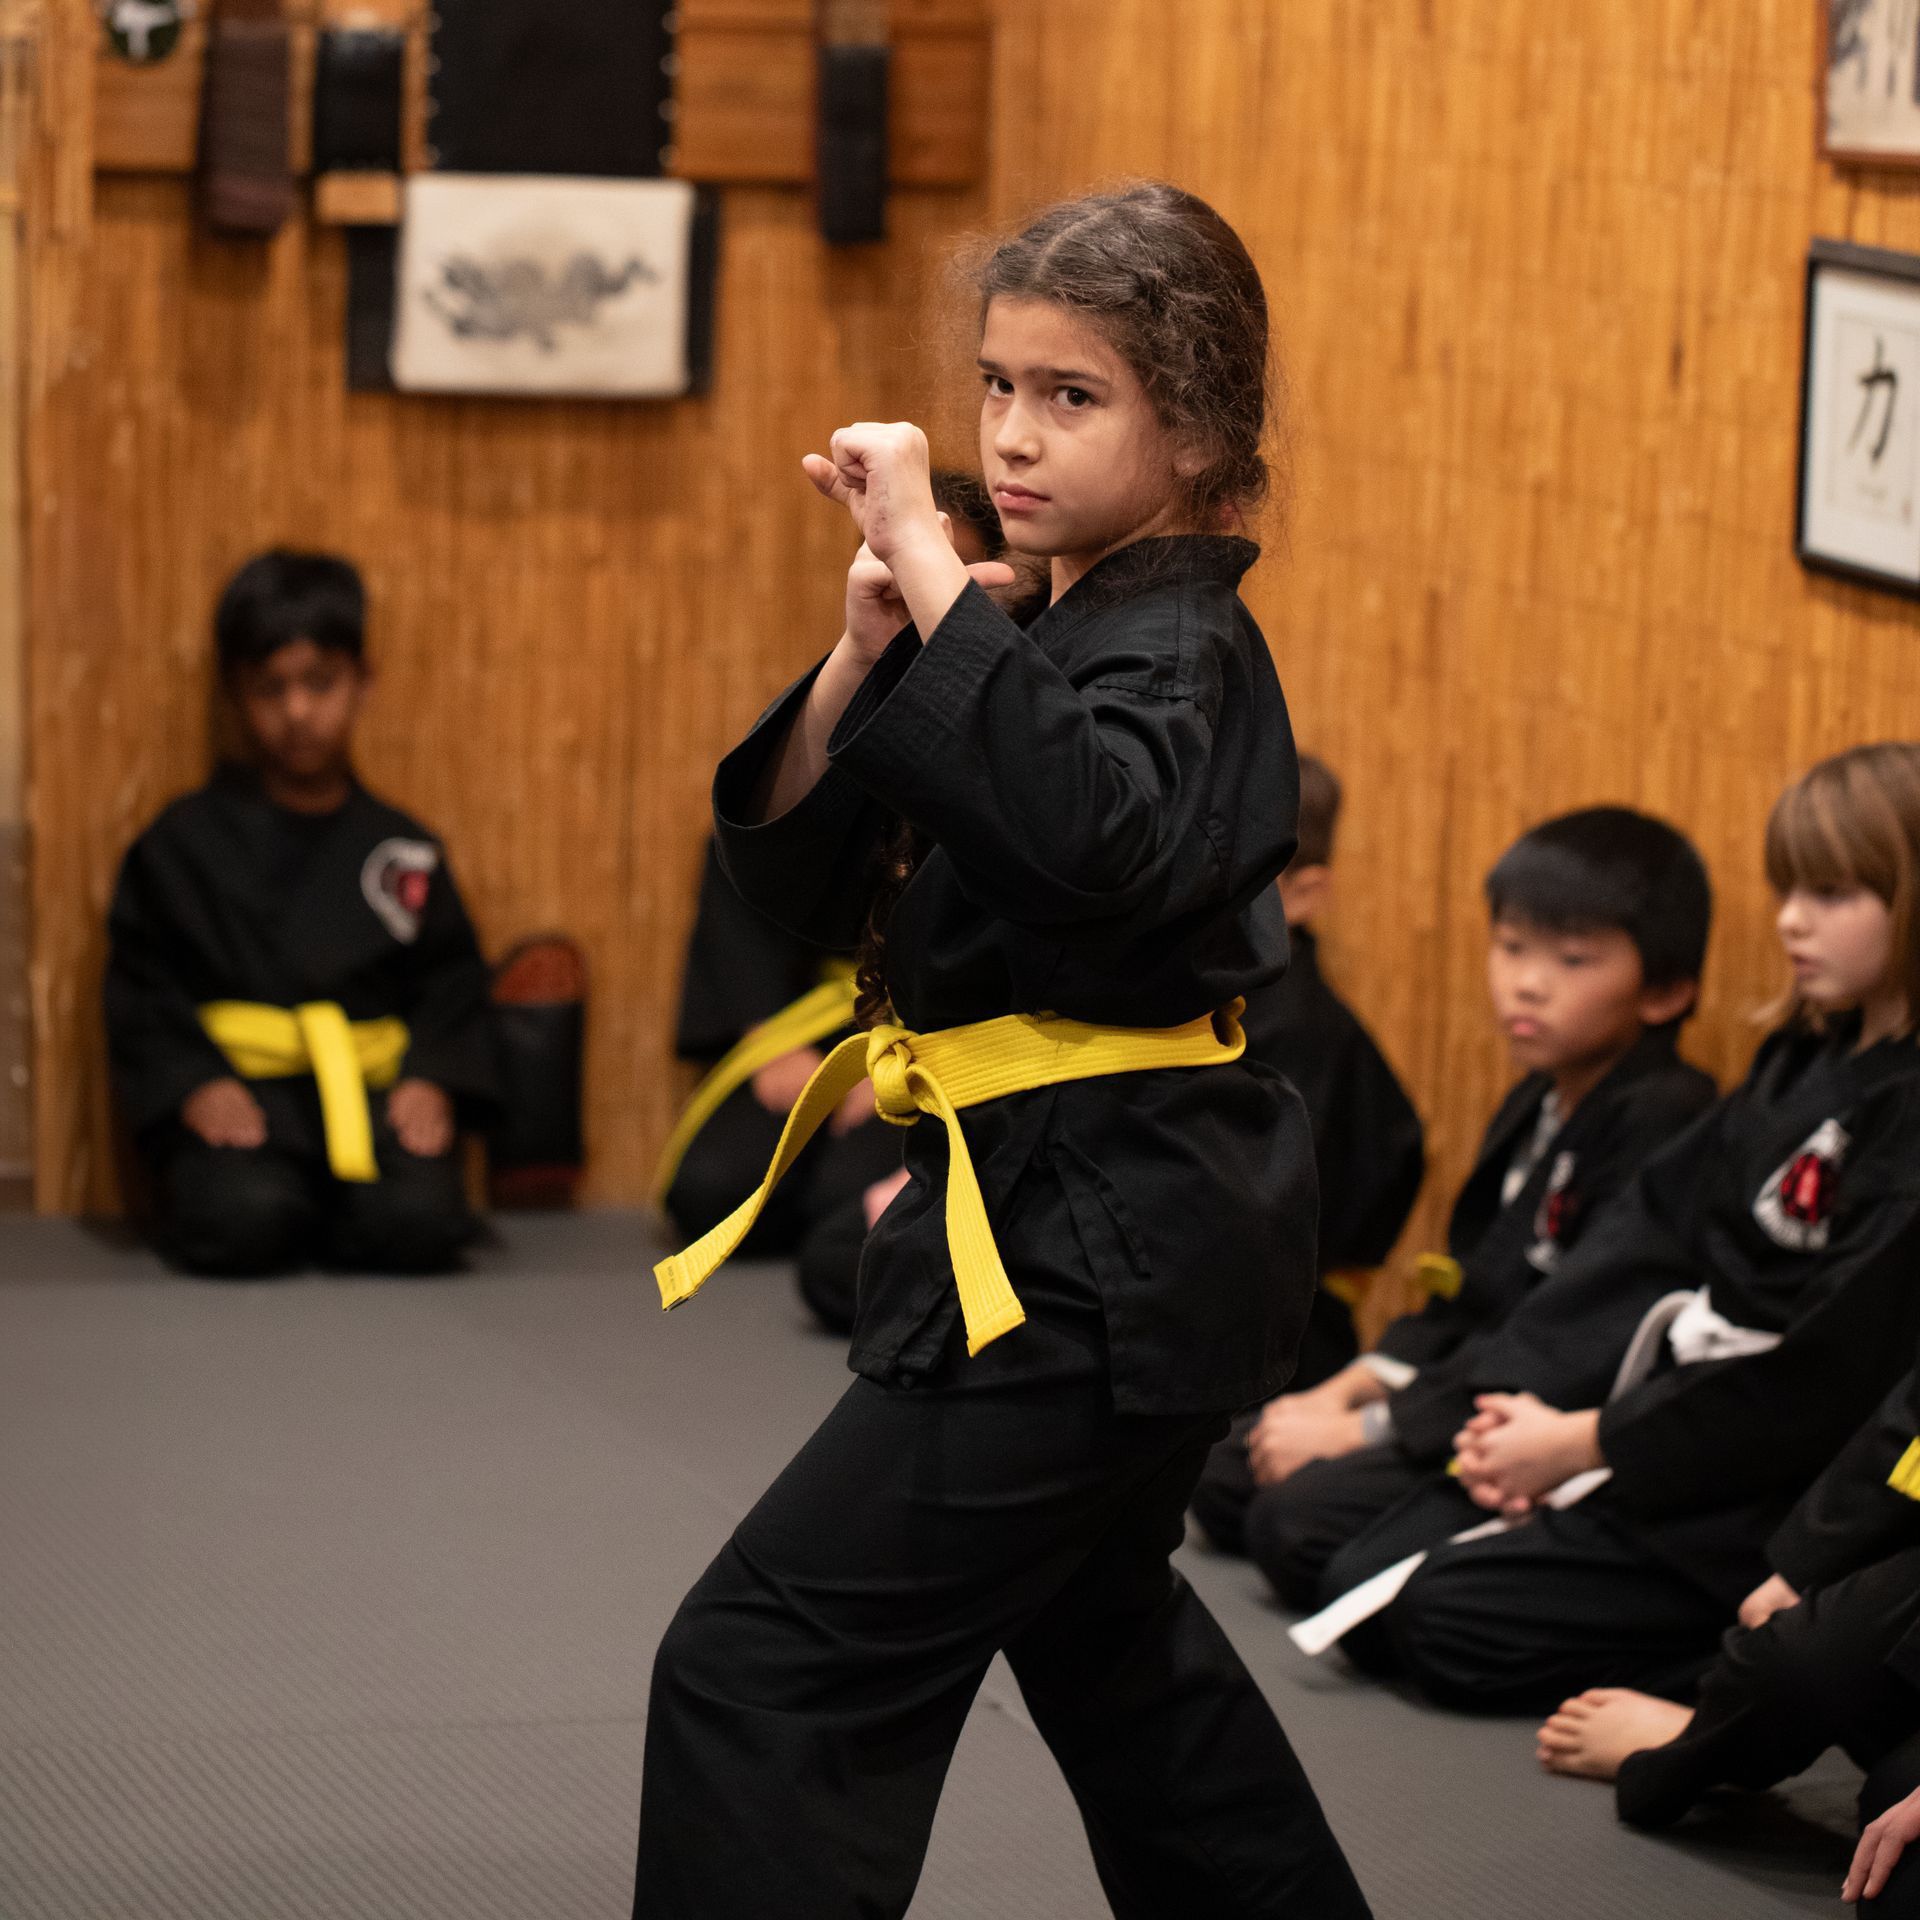 A young girl in a black karate uniform with a yellow belt